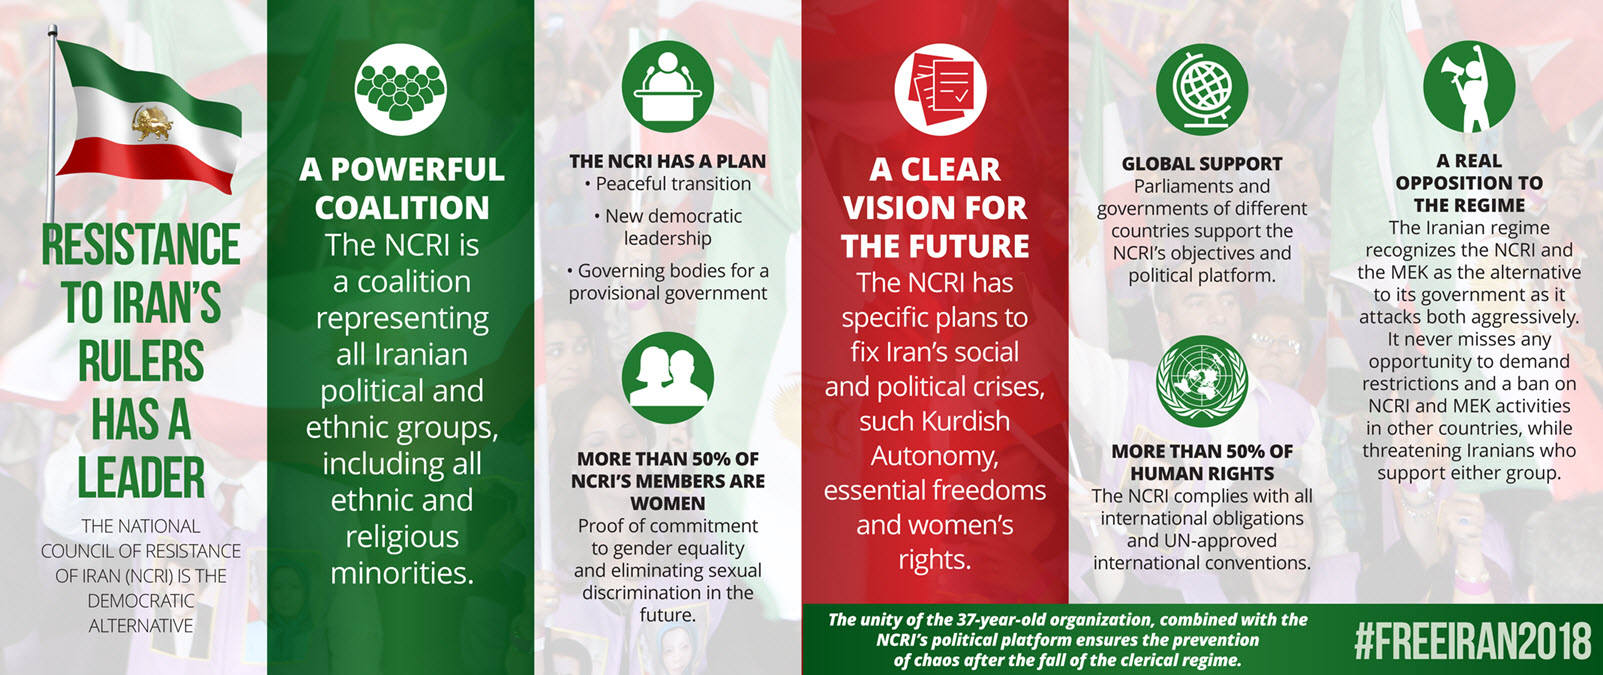 The National Council of Resistance of Iran (Ncri) Is the Democratic Alternative.